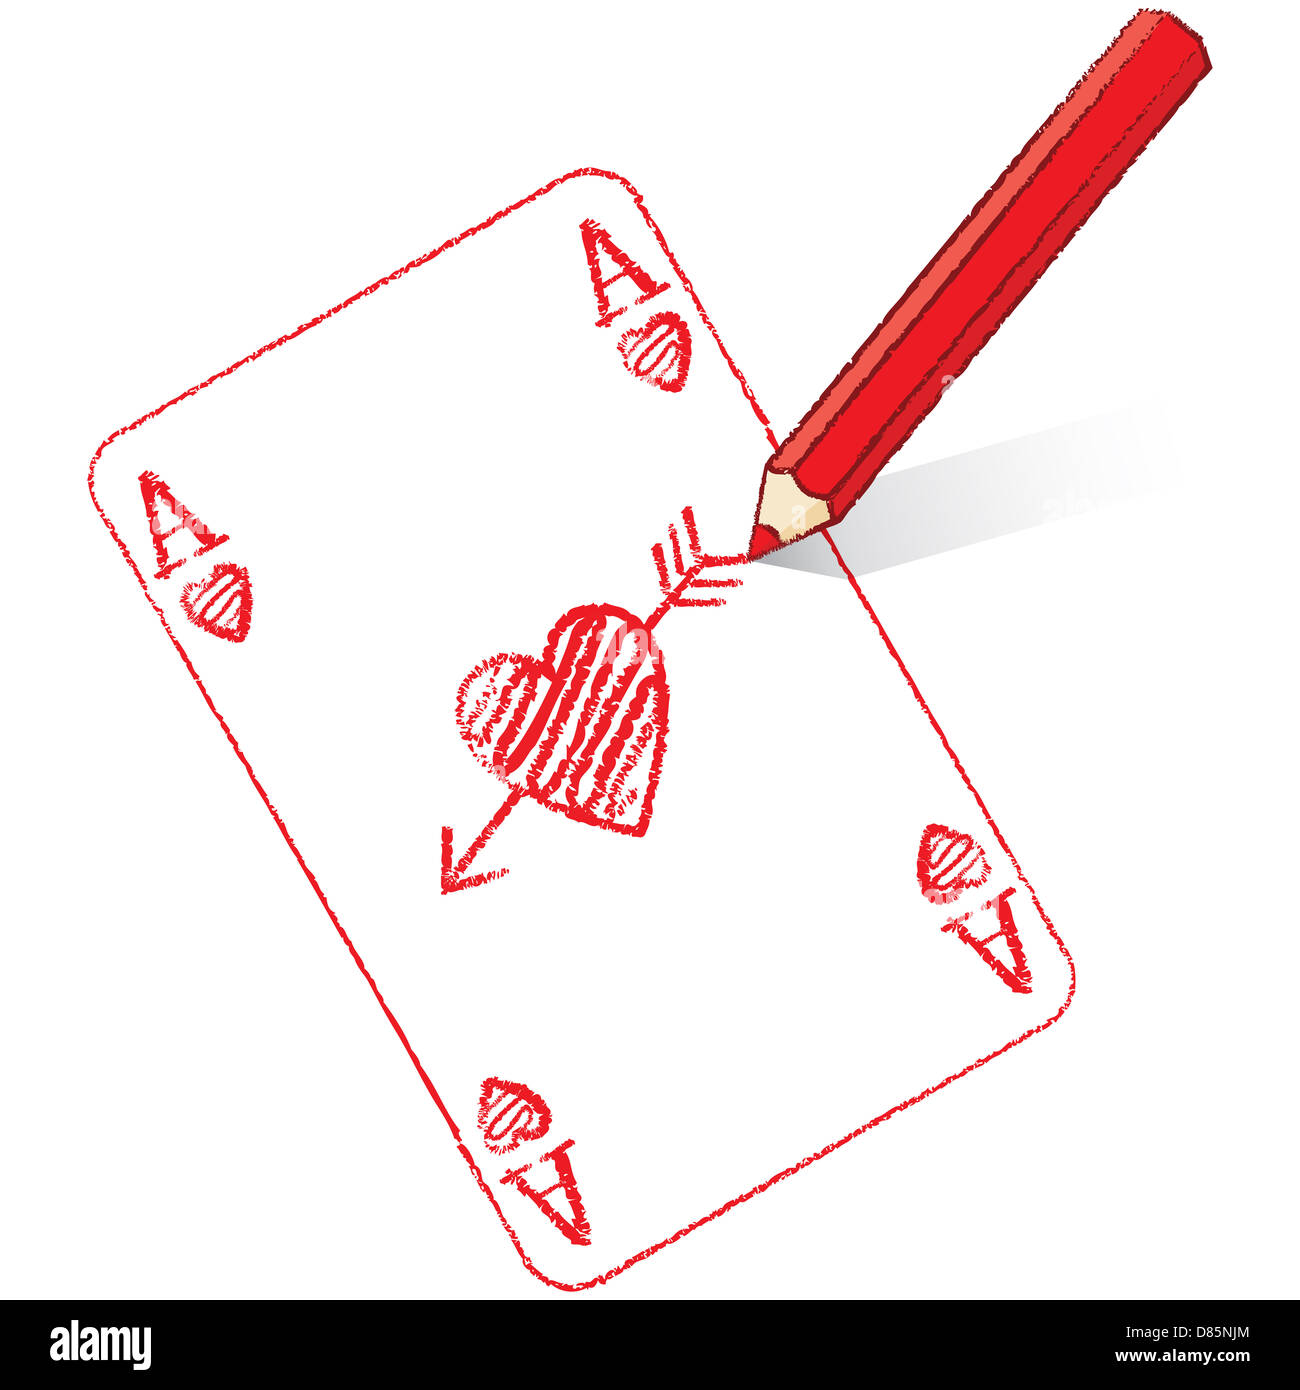 Red Pencil Drawing Various Ace of Hearts Playing Cards with Cupid'a ...